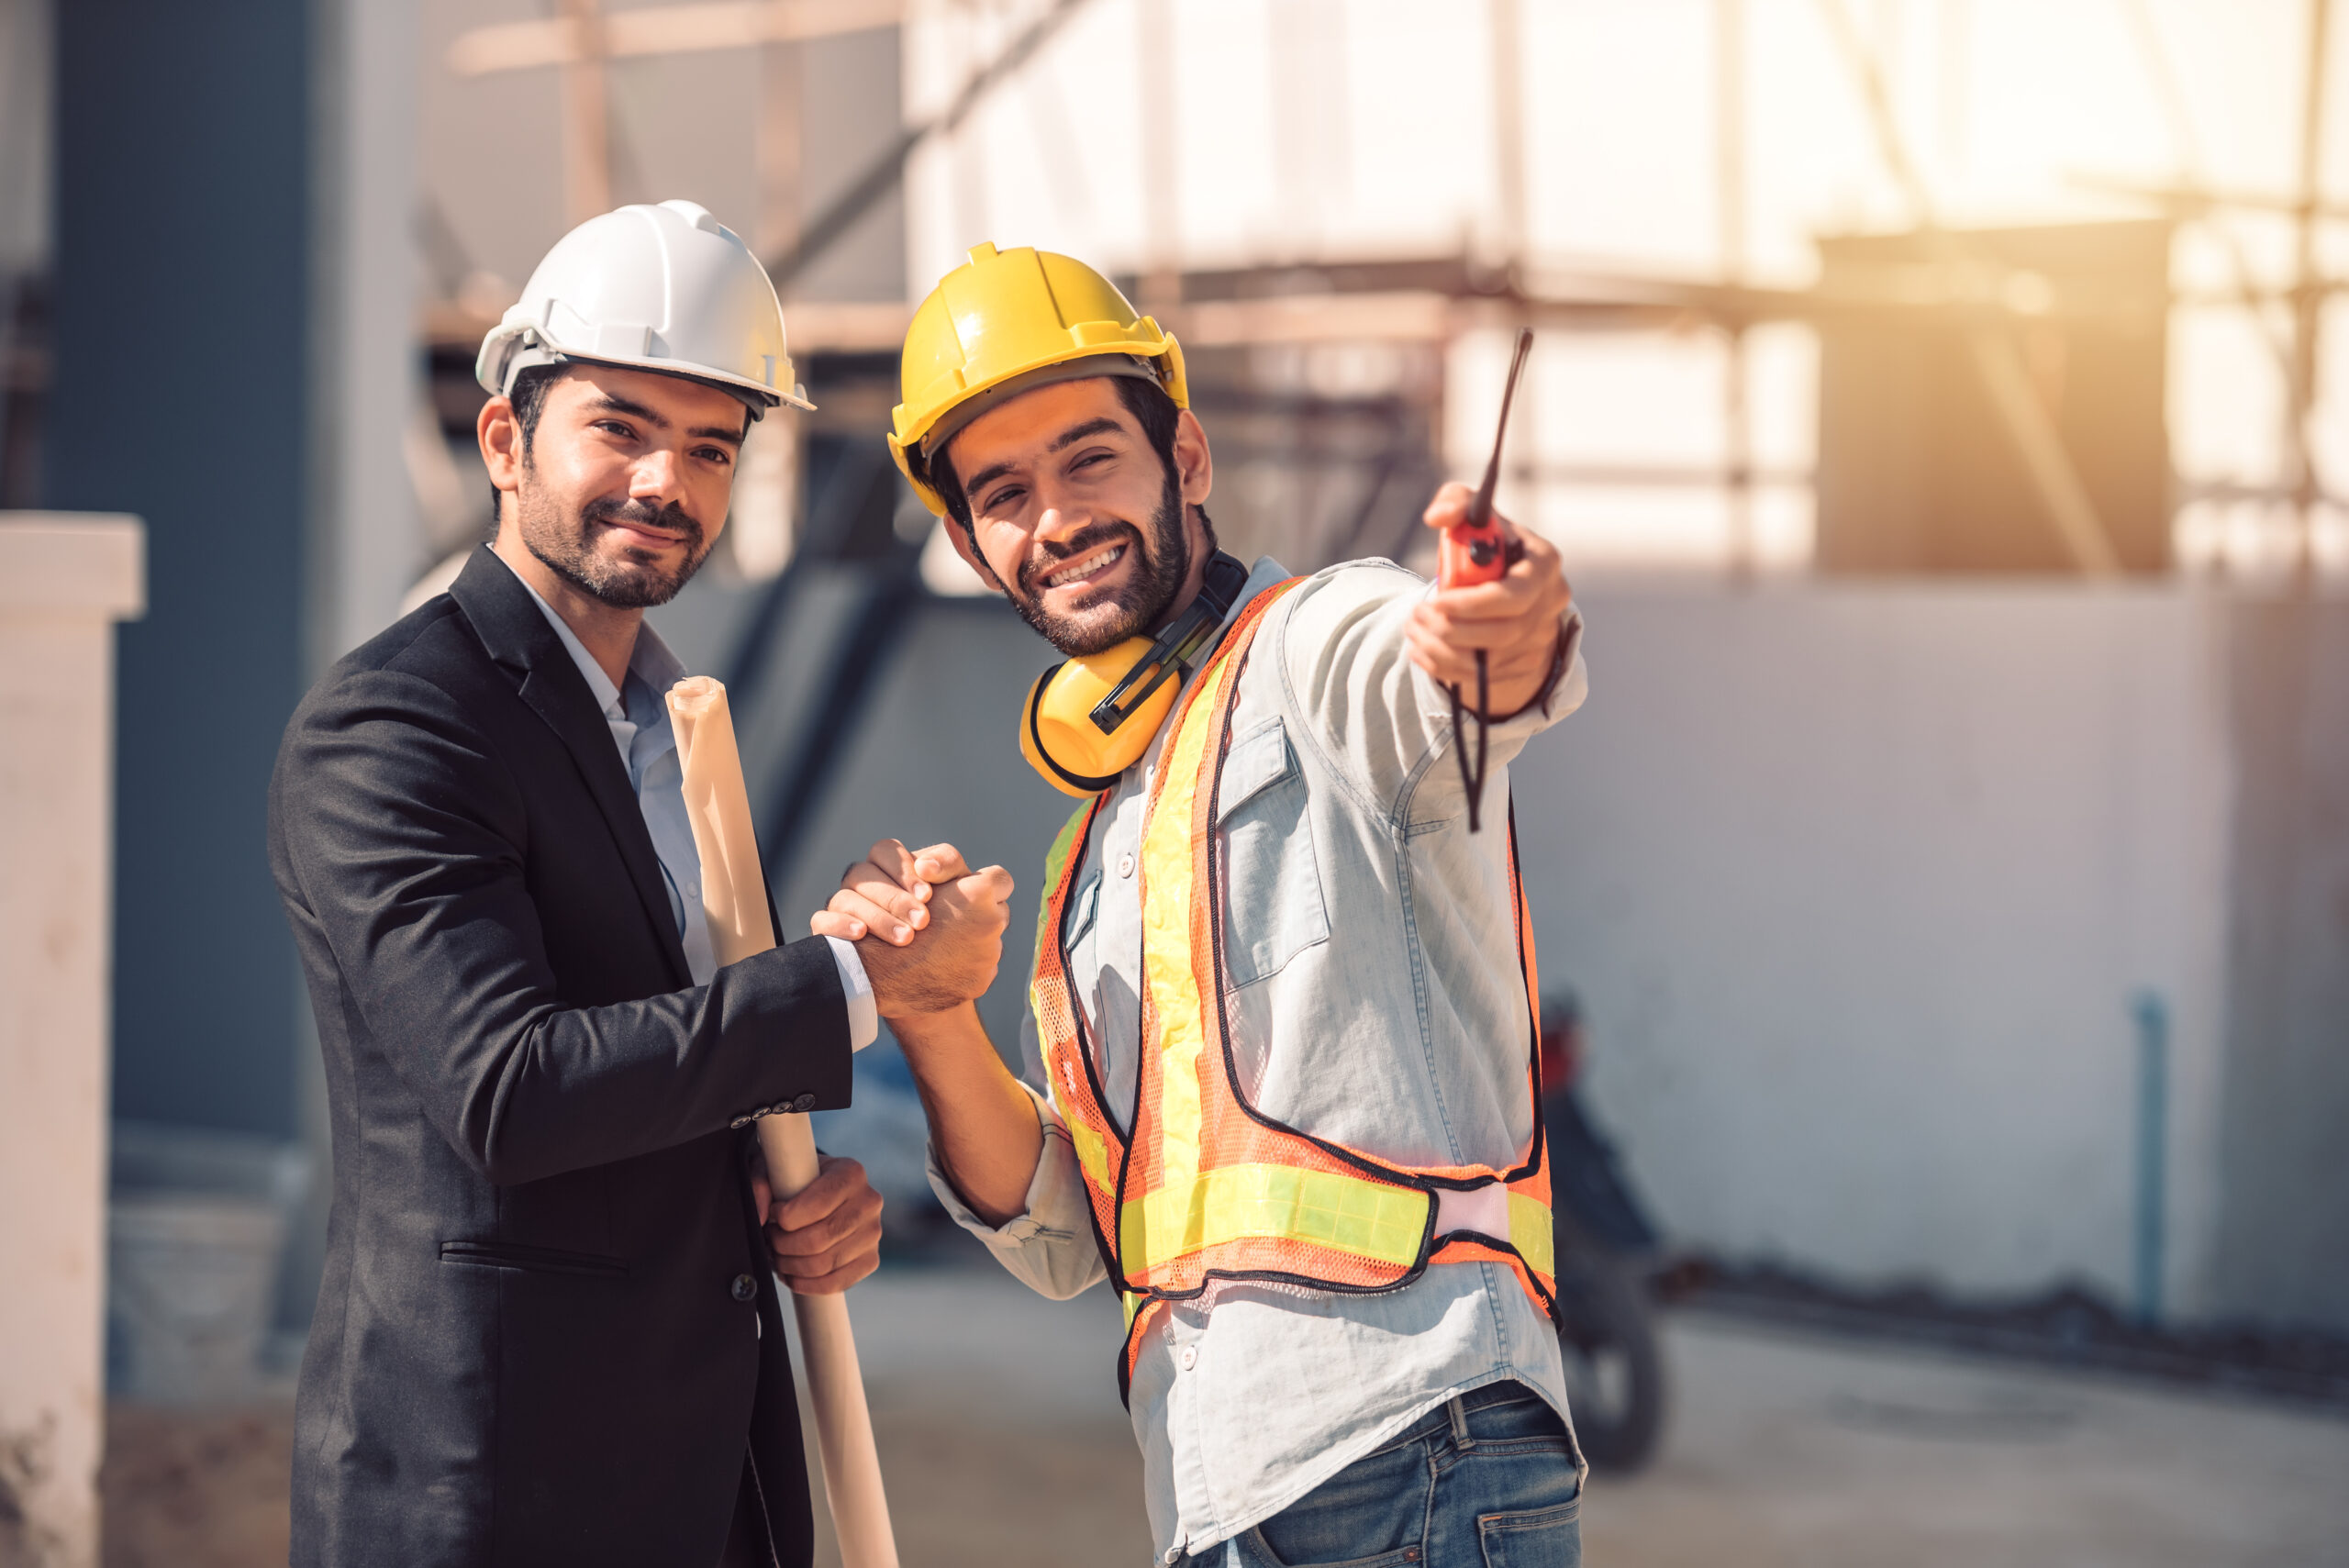 happy-workers-construction-site-young-civil-engineer-manager-architects-handshaking-construction-site-looking-construction-phase-cooperation-teamwork-concept